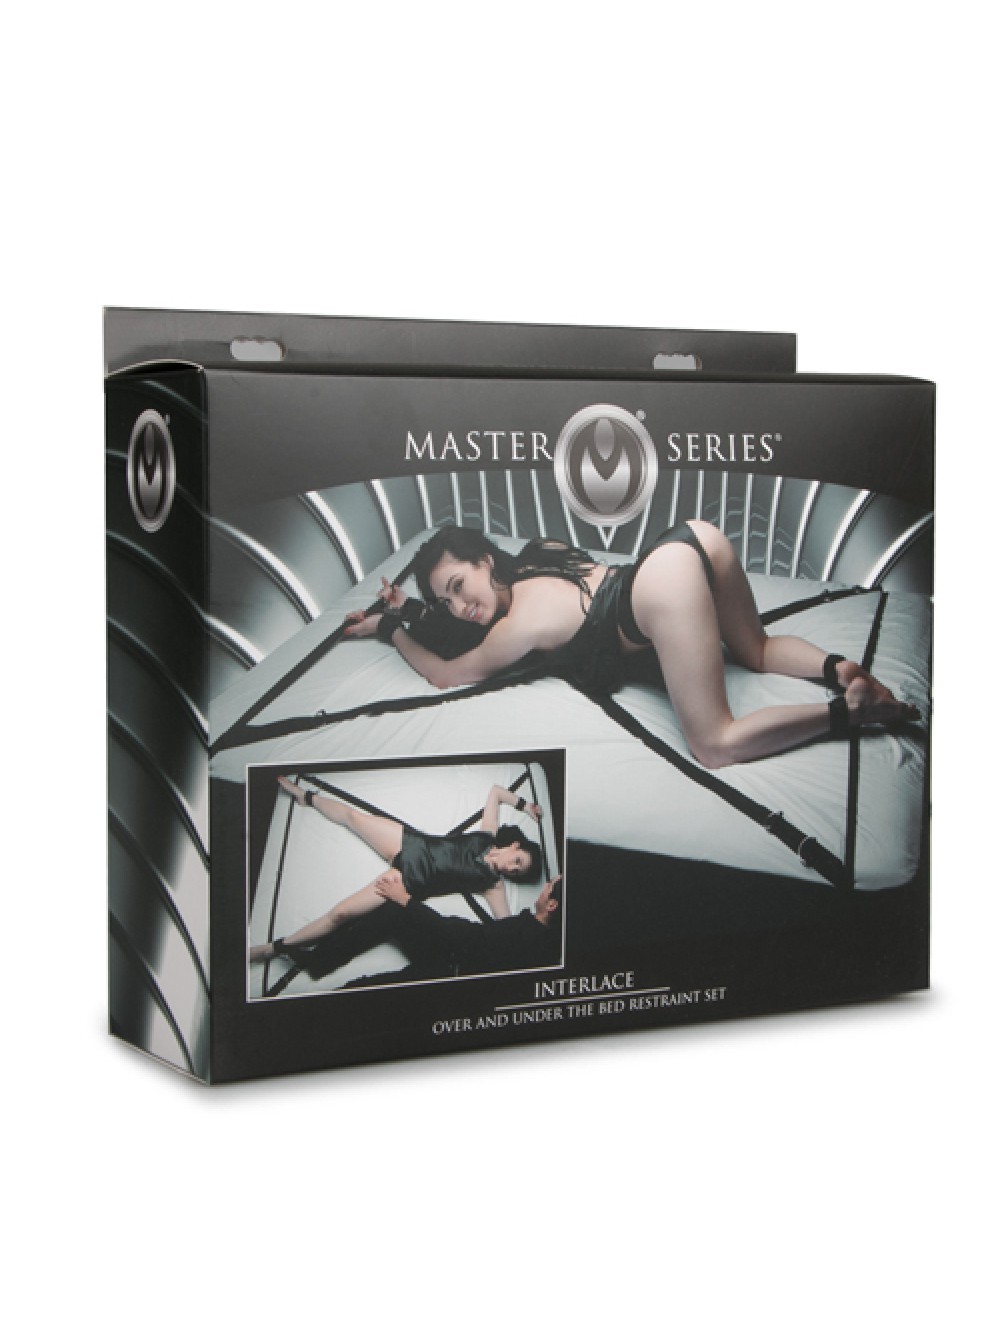 Over and Under the Bed - Bondage Set 848518022400